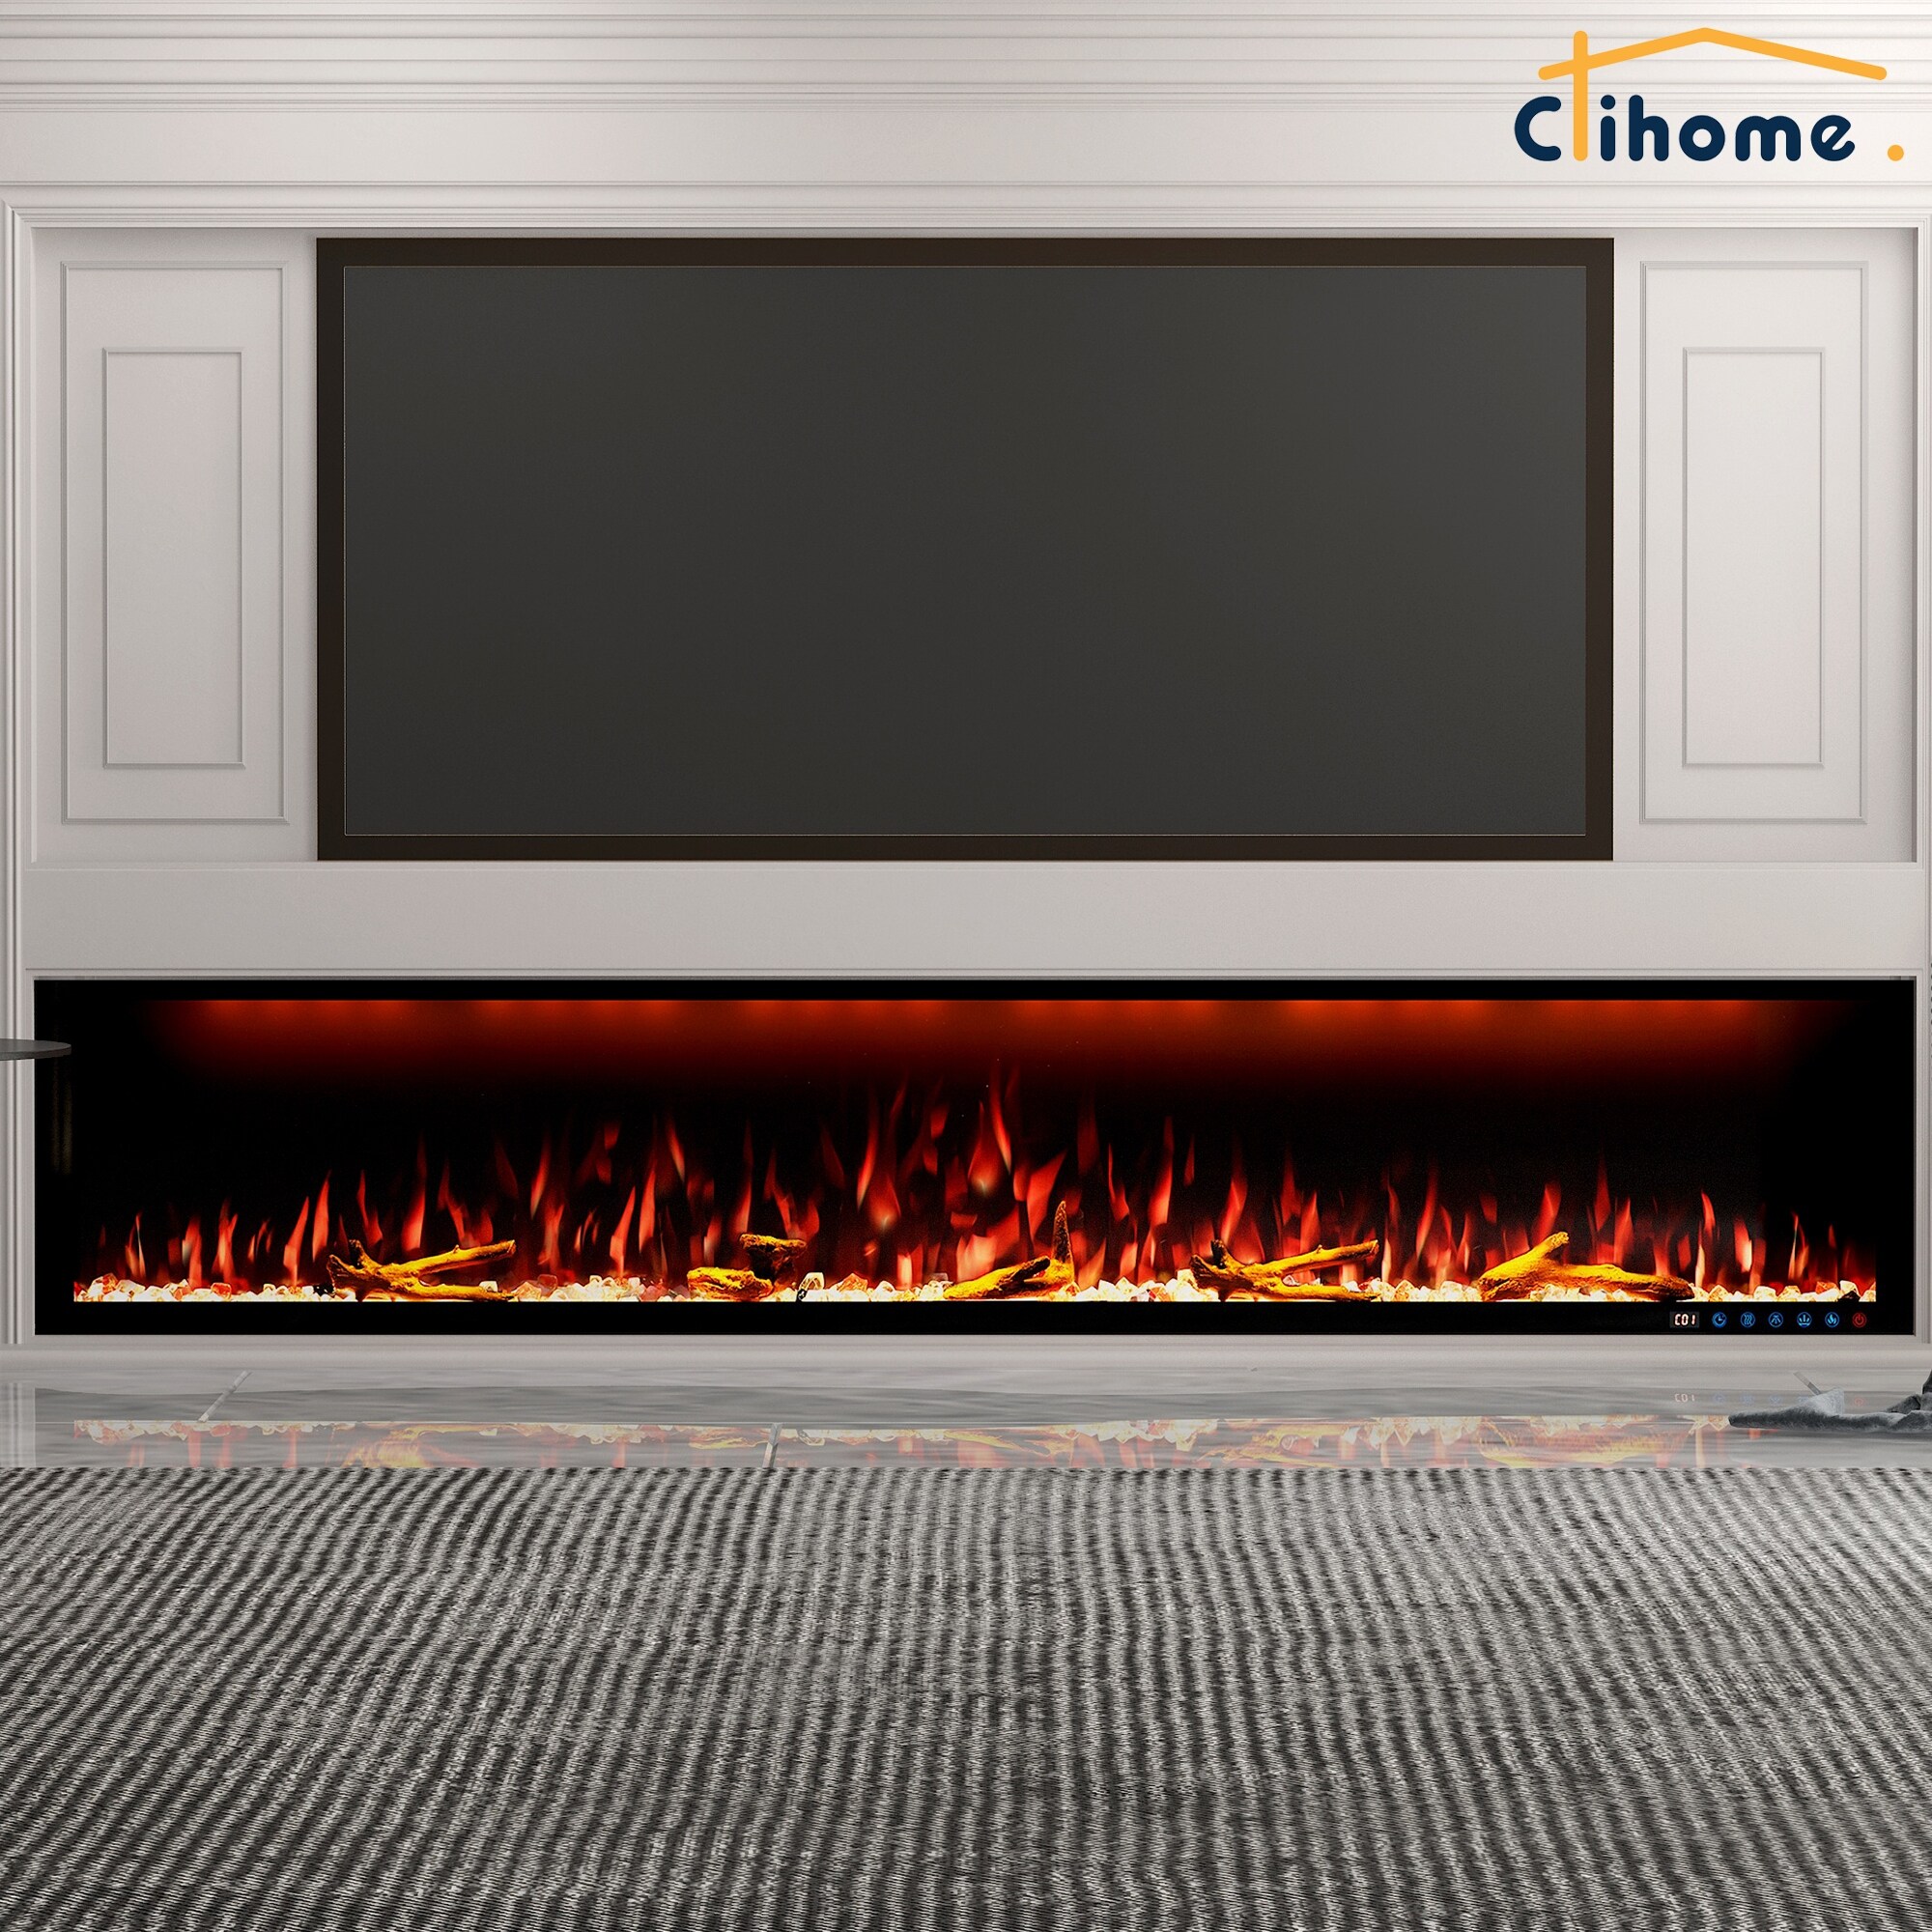 Clihome 50-88" Wall-Mounted & Built-in Electric Fireplace with WIFI Control